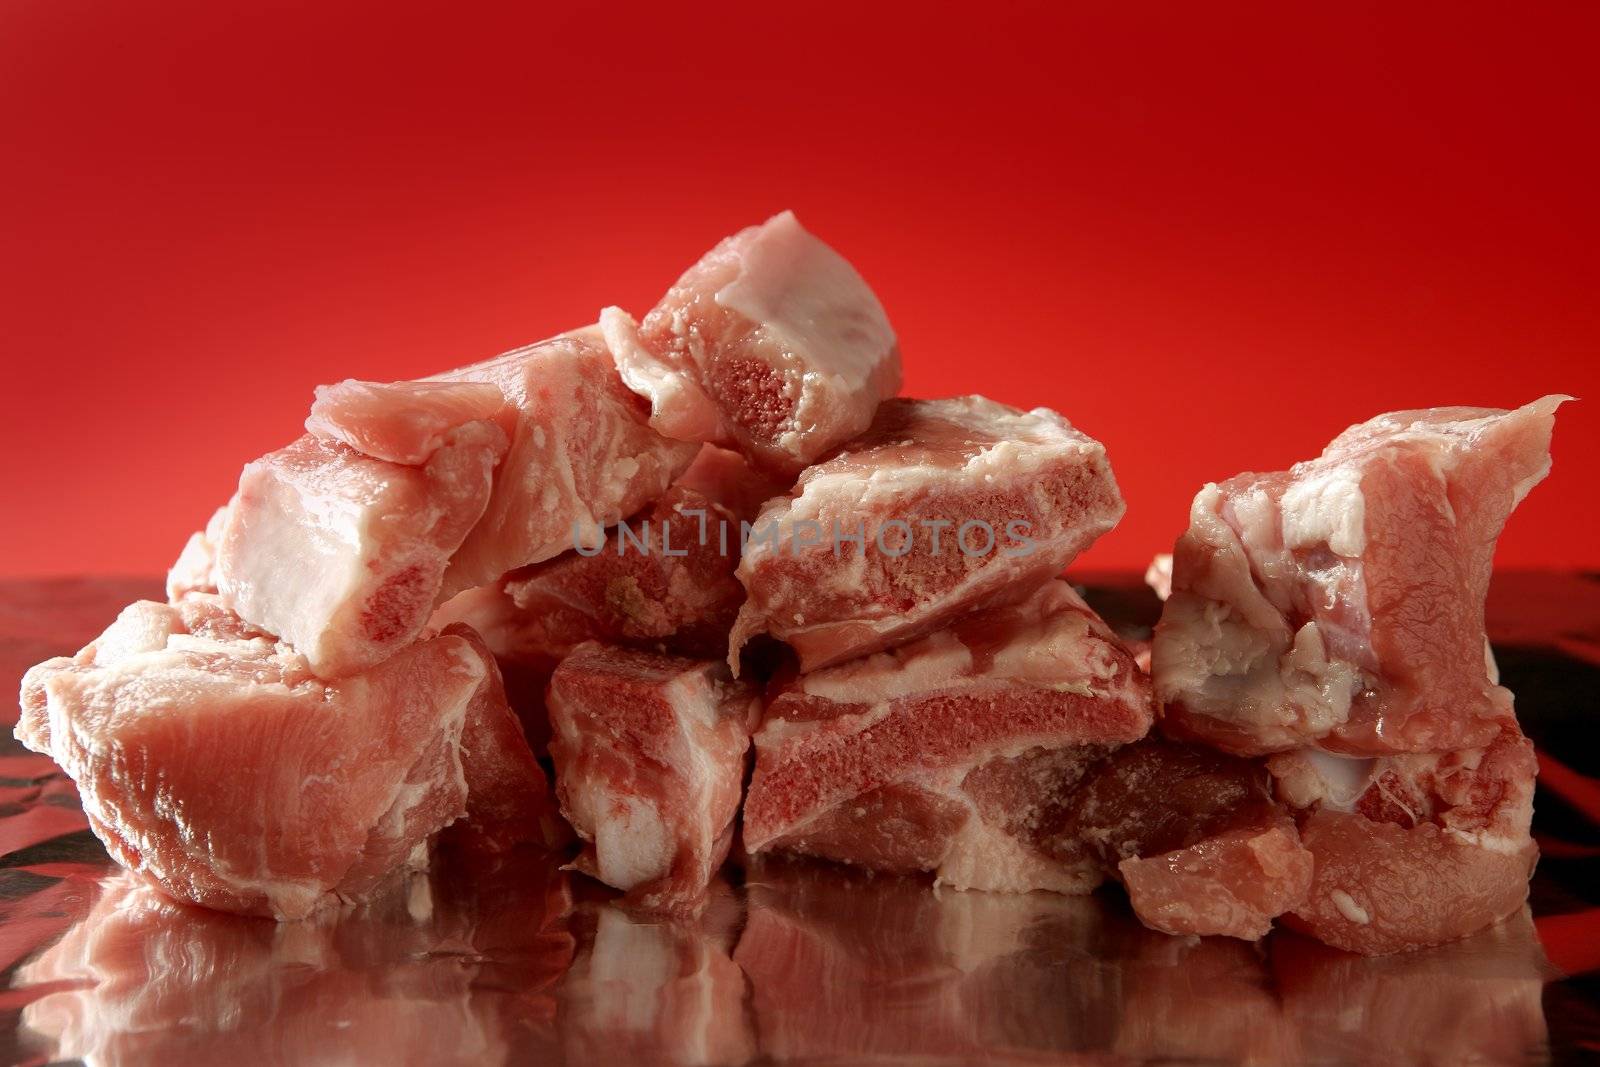 Pig, pork raw meat pieces over red by lunamarina